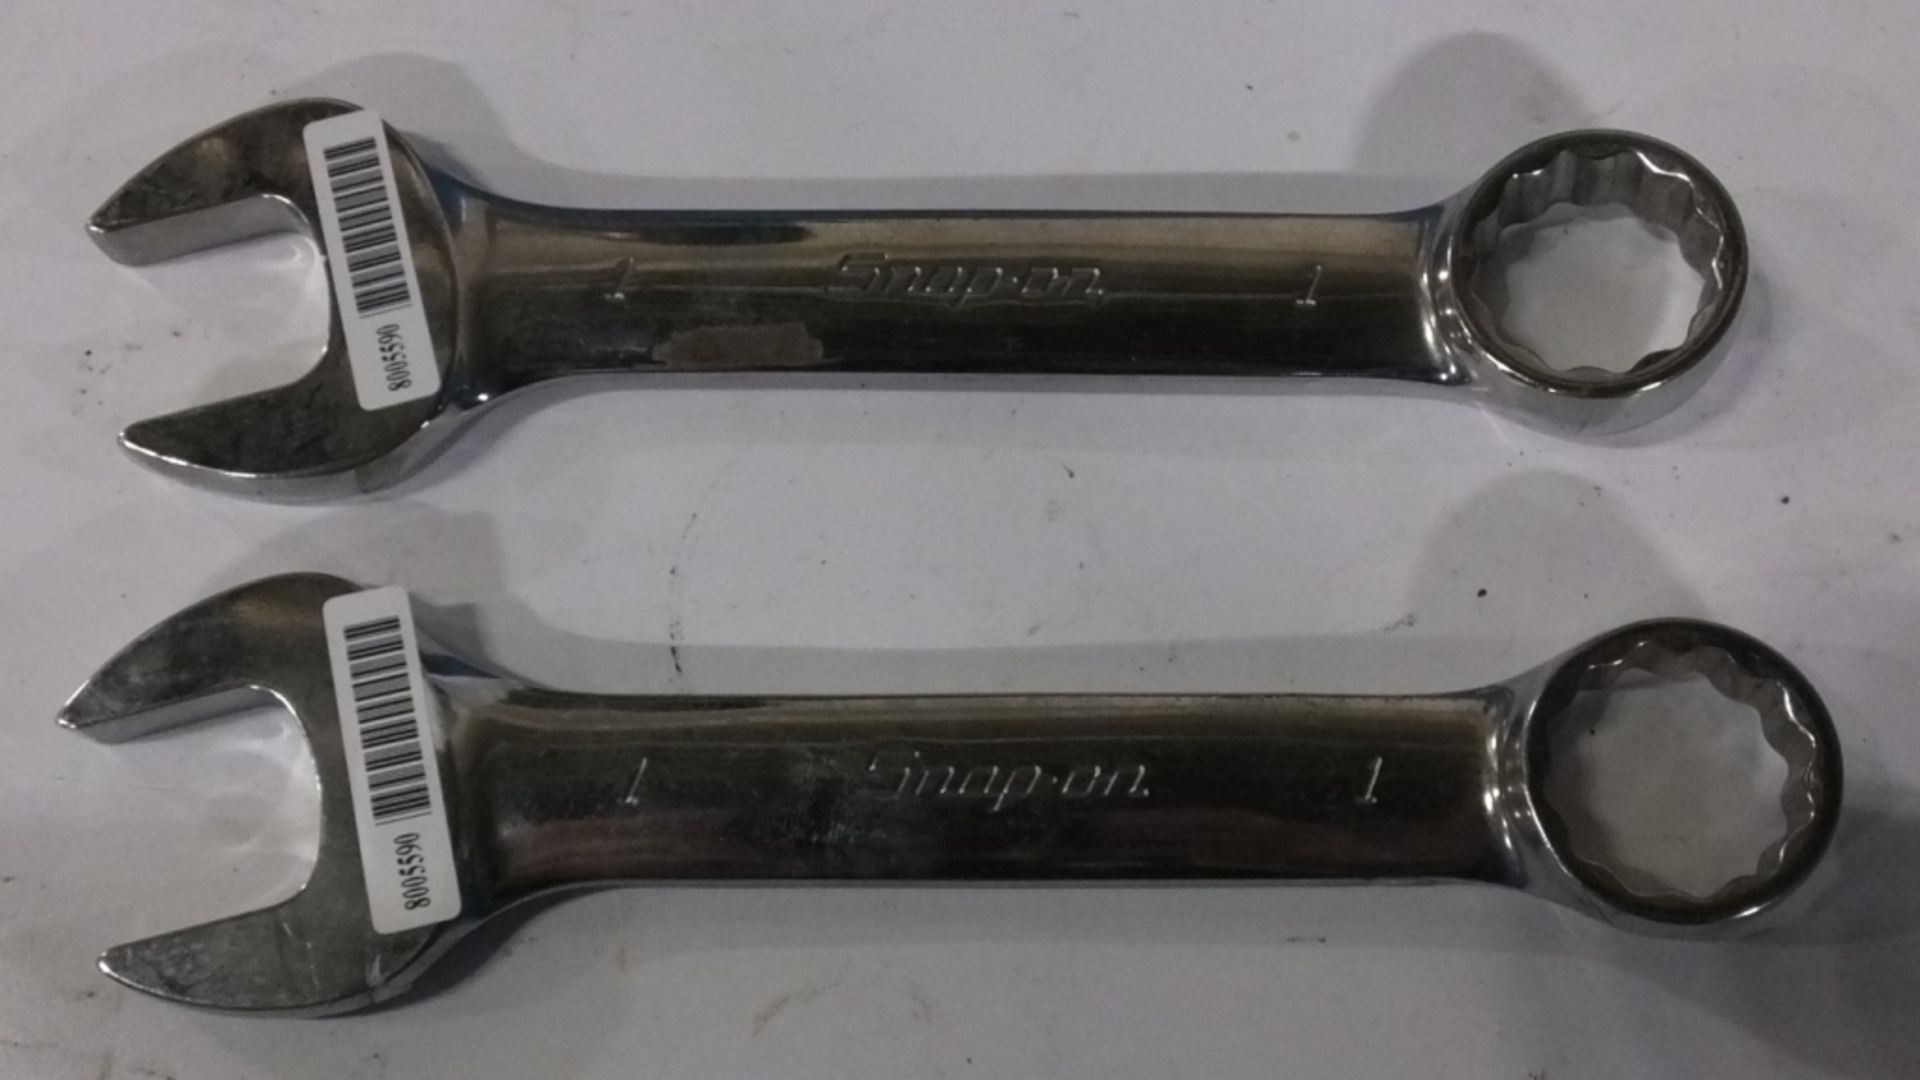 2x Snap-On Combination spanners - 1